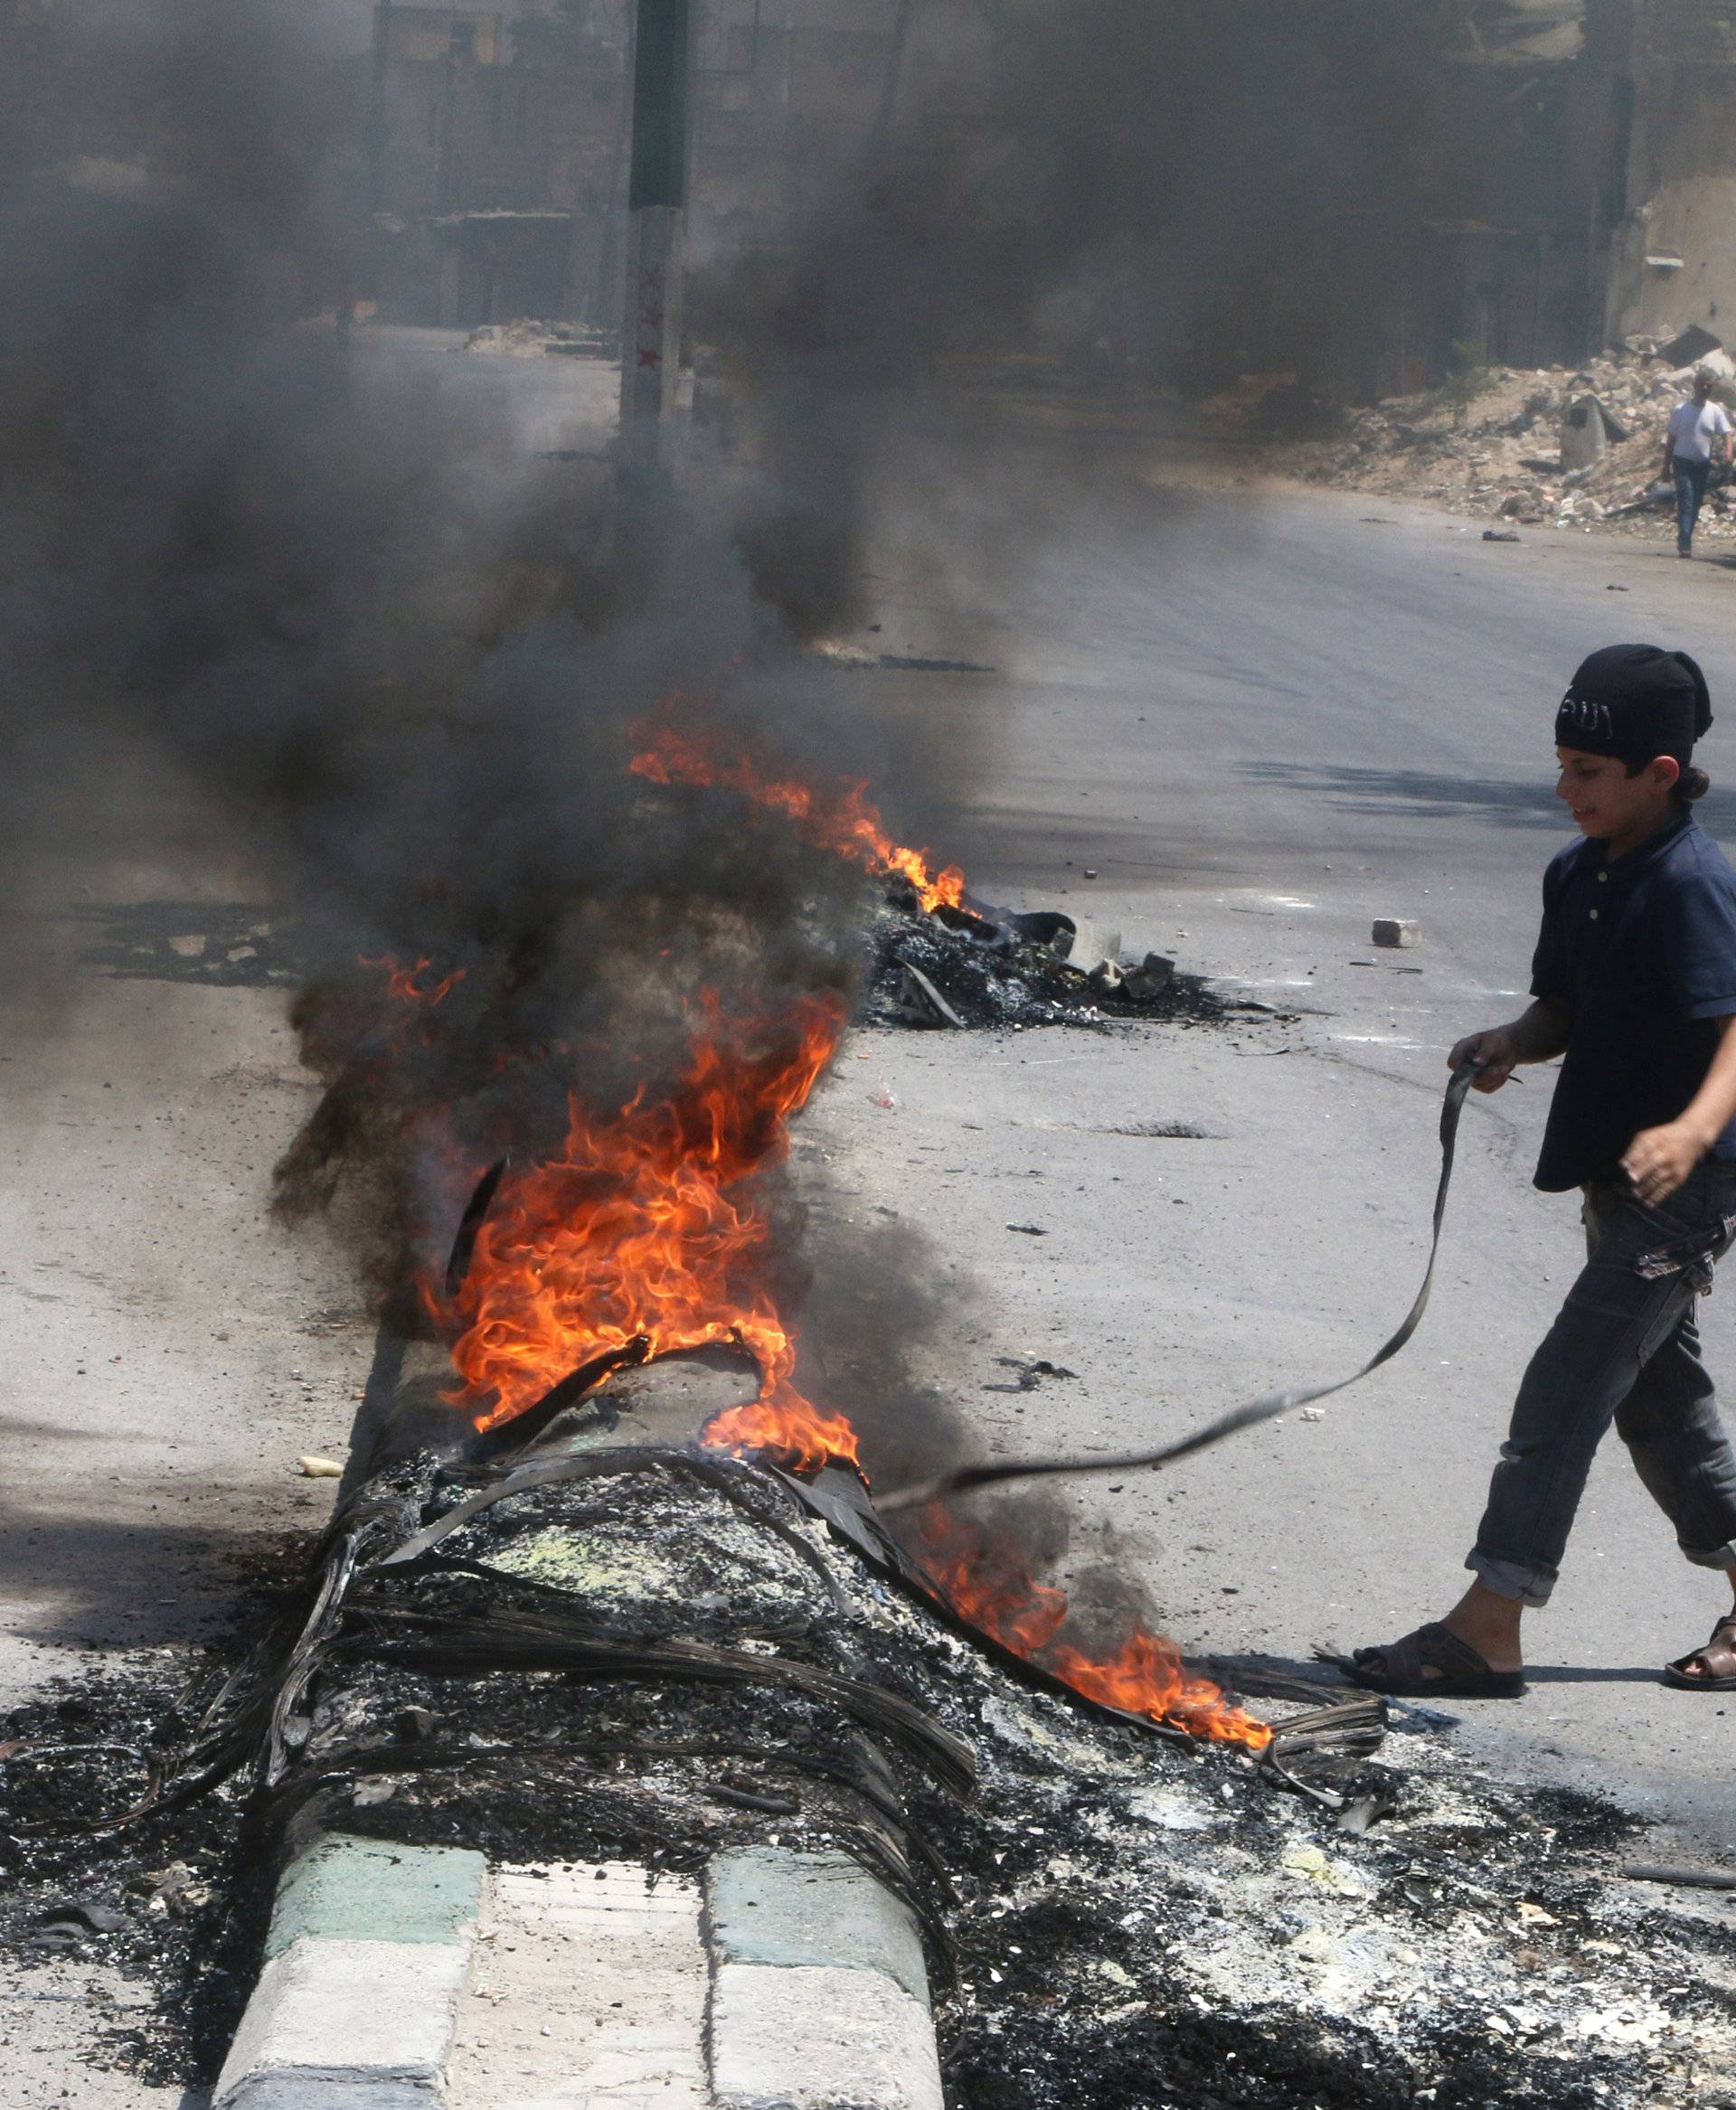 A boy inspects burning tyres, which activists said are used to create smoke cover from warplanes, in Aleppo